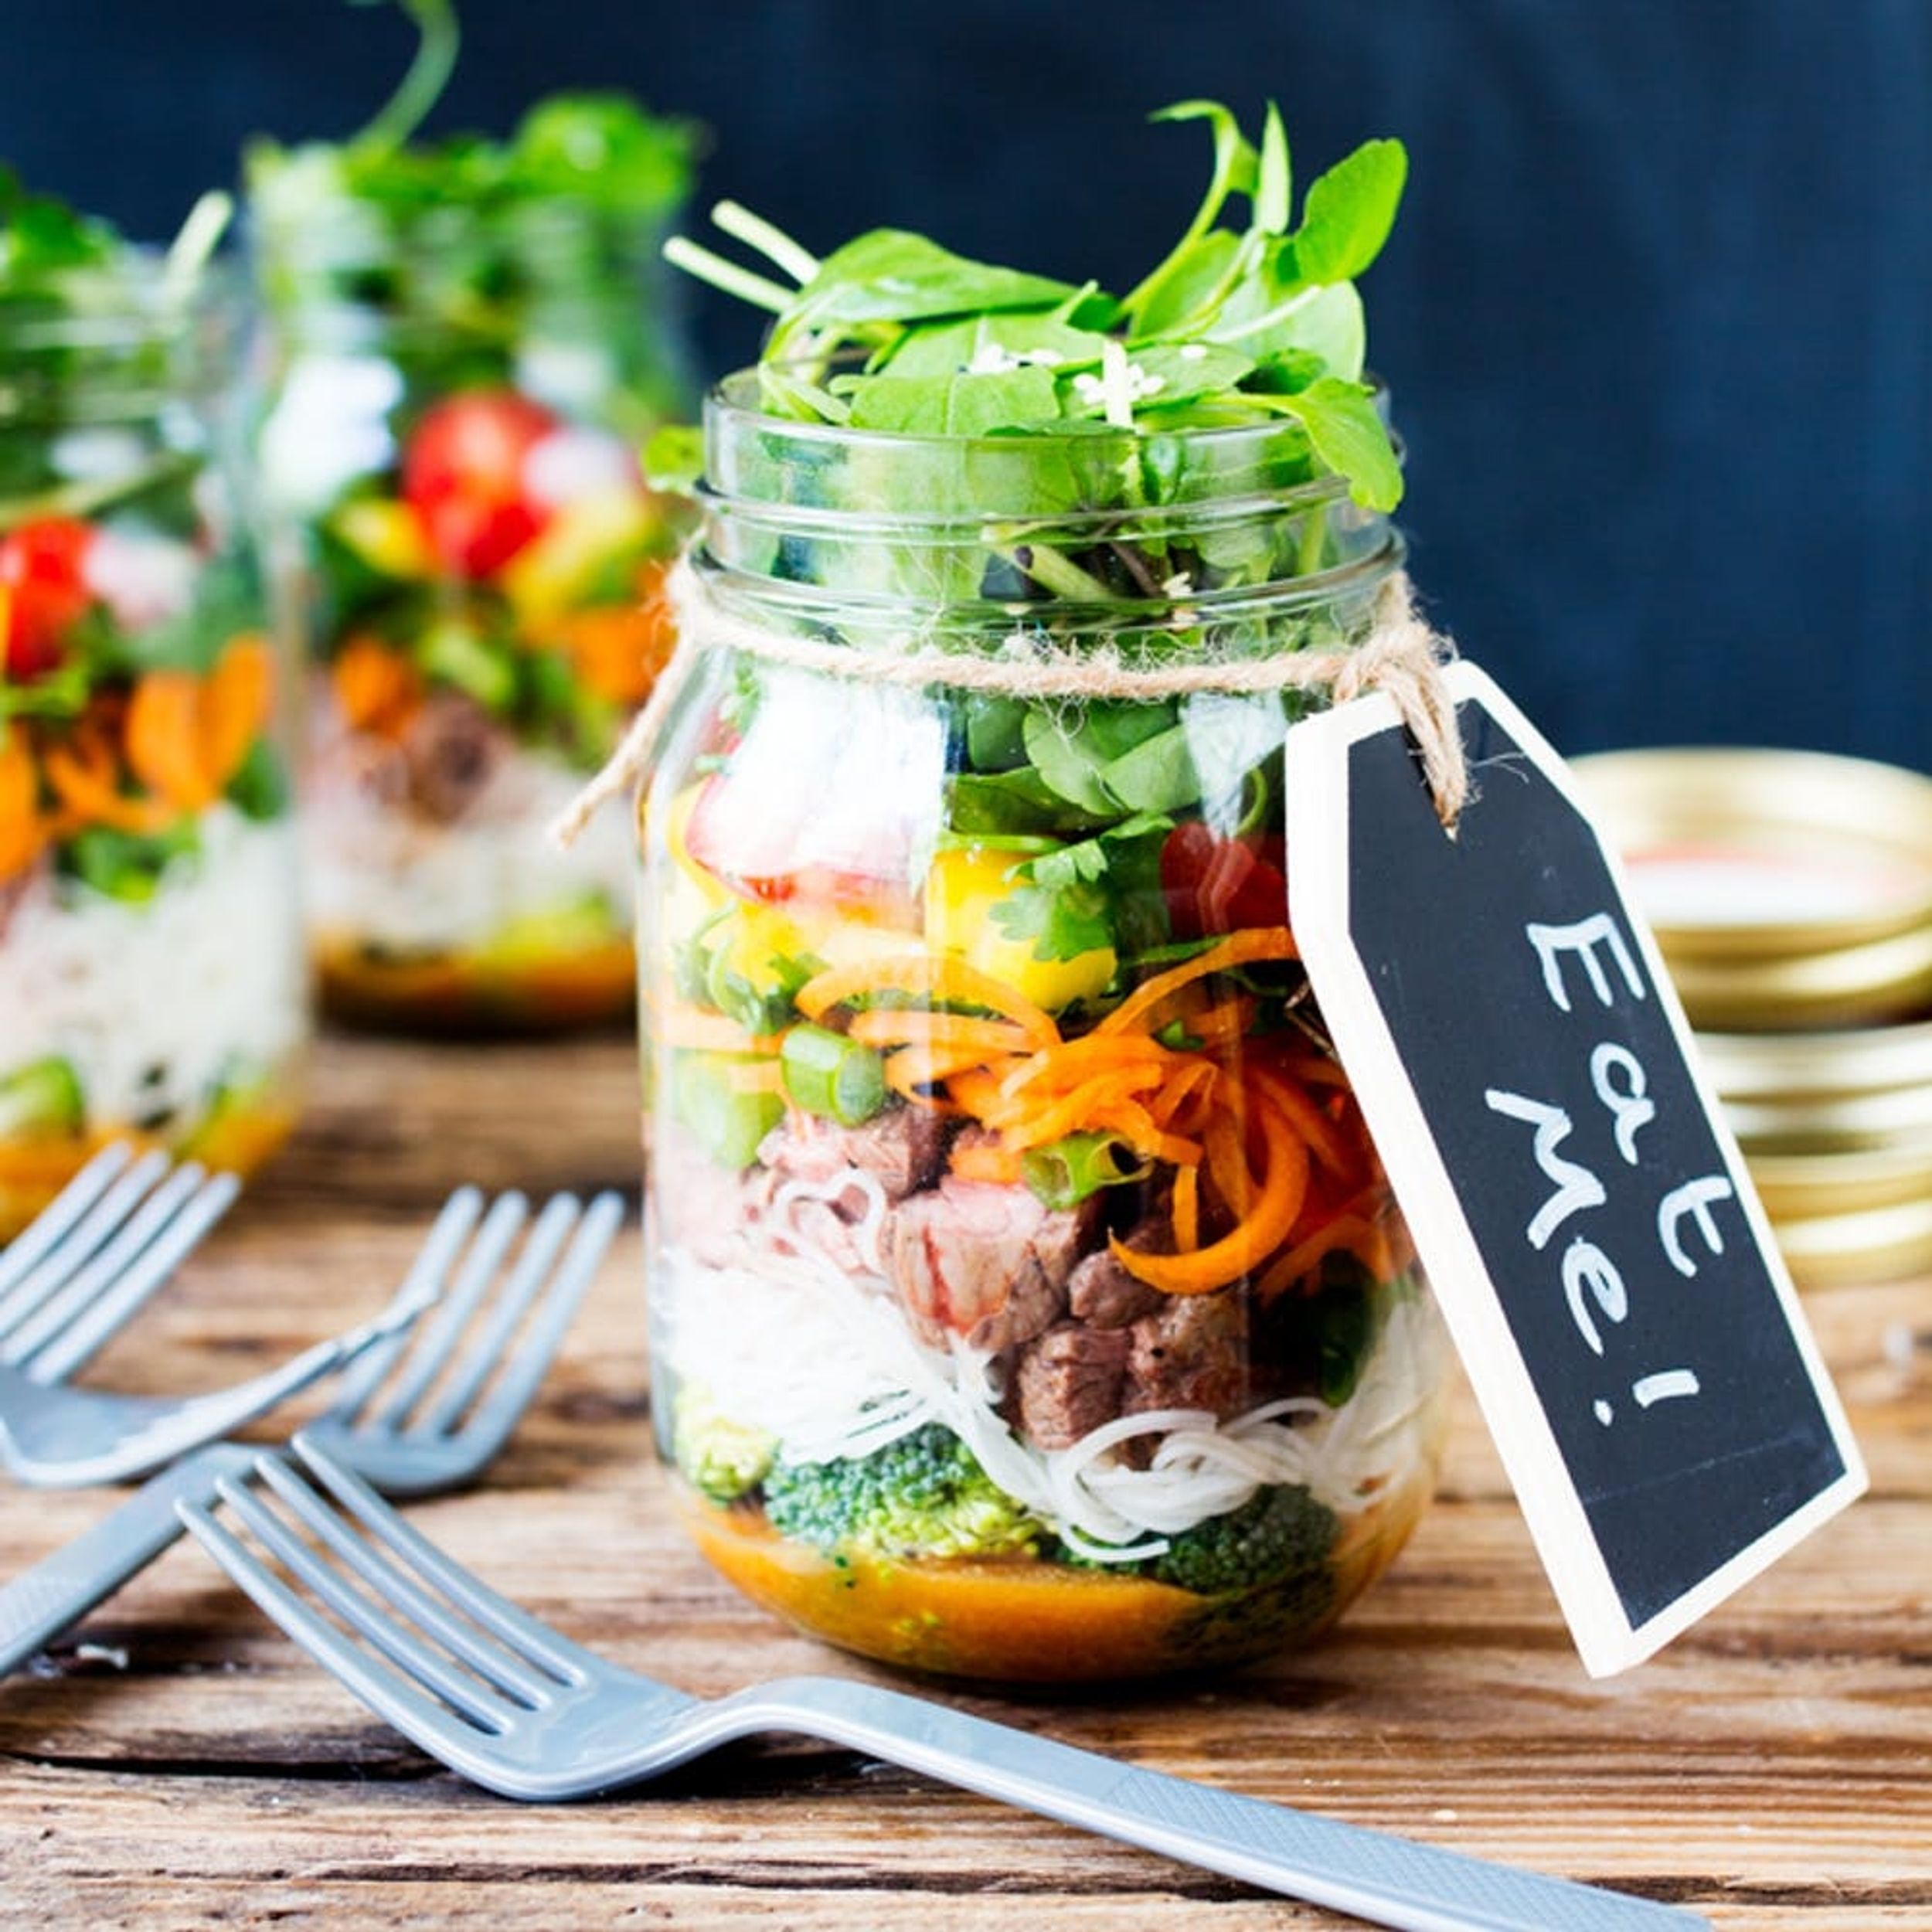 Your Next Lunch Needs This Thai Salad in a Jar Recipe